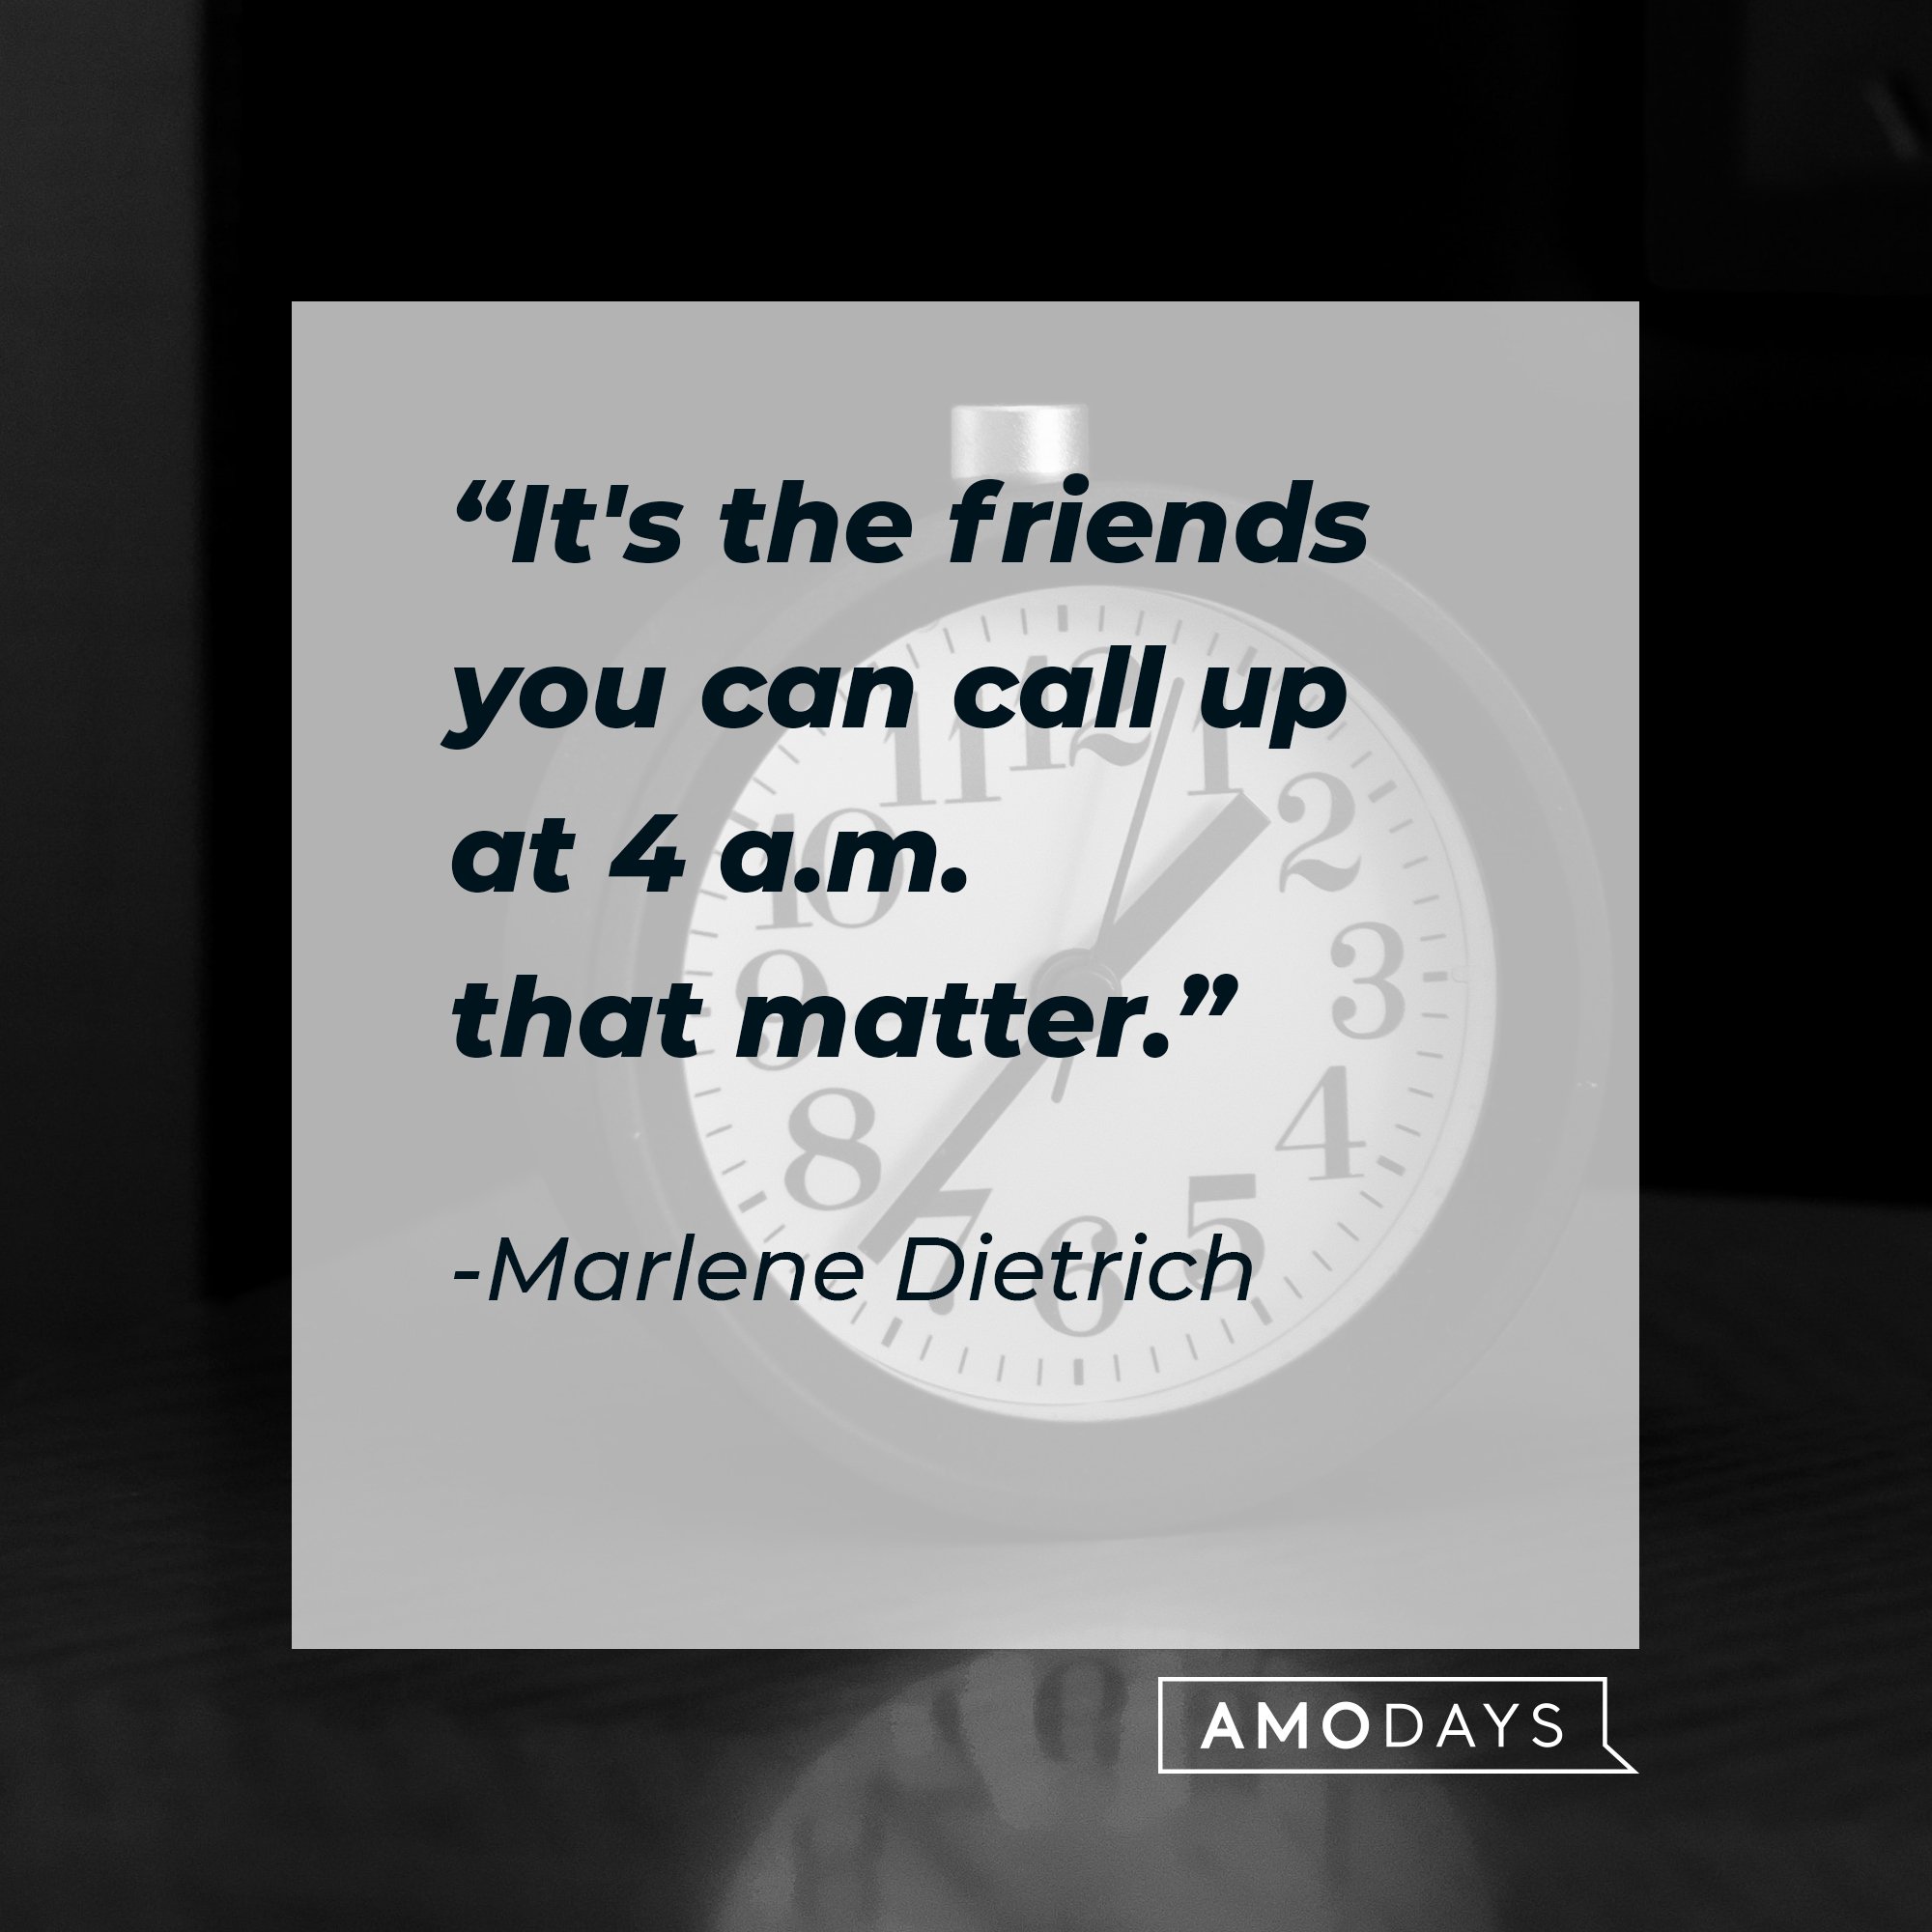 Marlene Dietrich’s quote: "It's the friends you can call up at 4 a.m. that matter."  | Image: AmoDays 